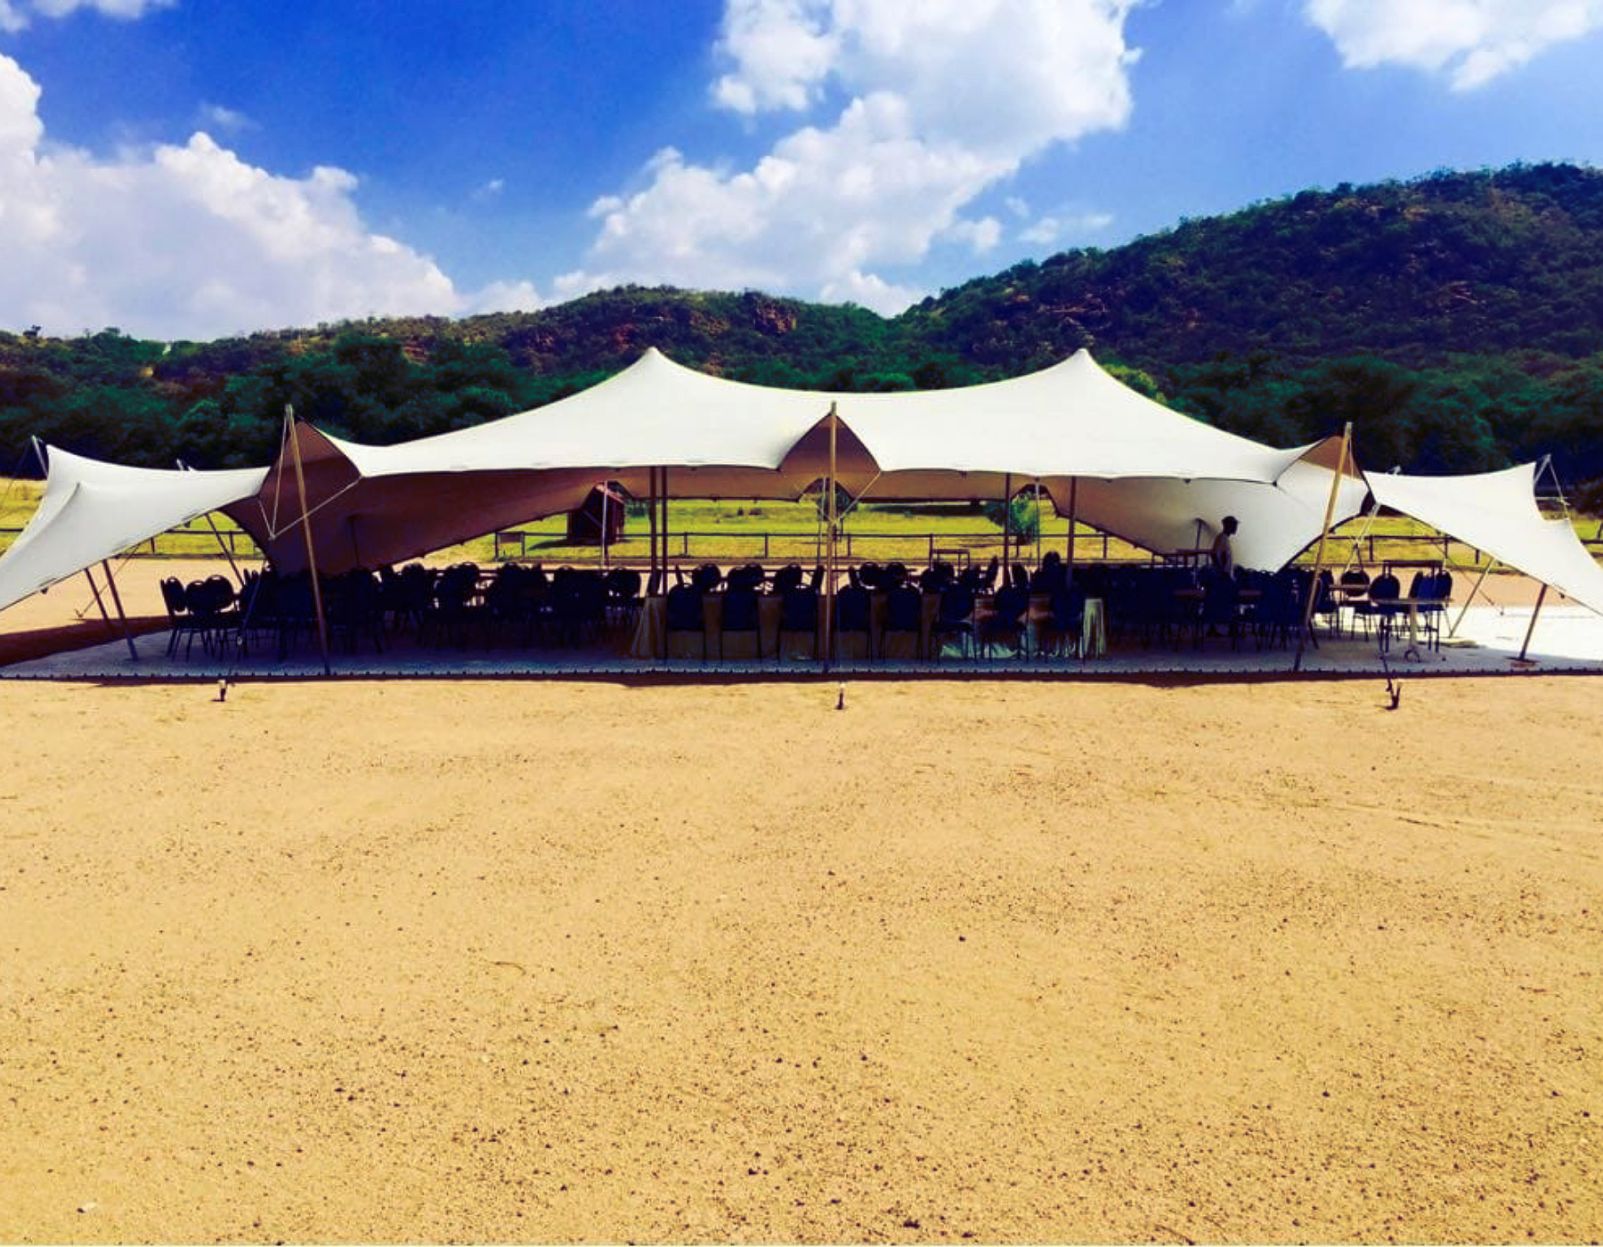 White Stretch Tent Used As Chapel For An Outdoor Wedding Ceremony.